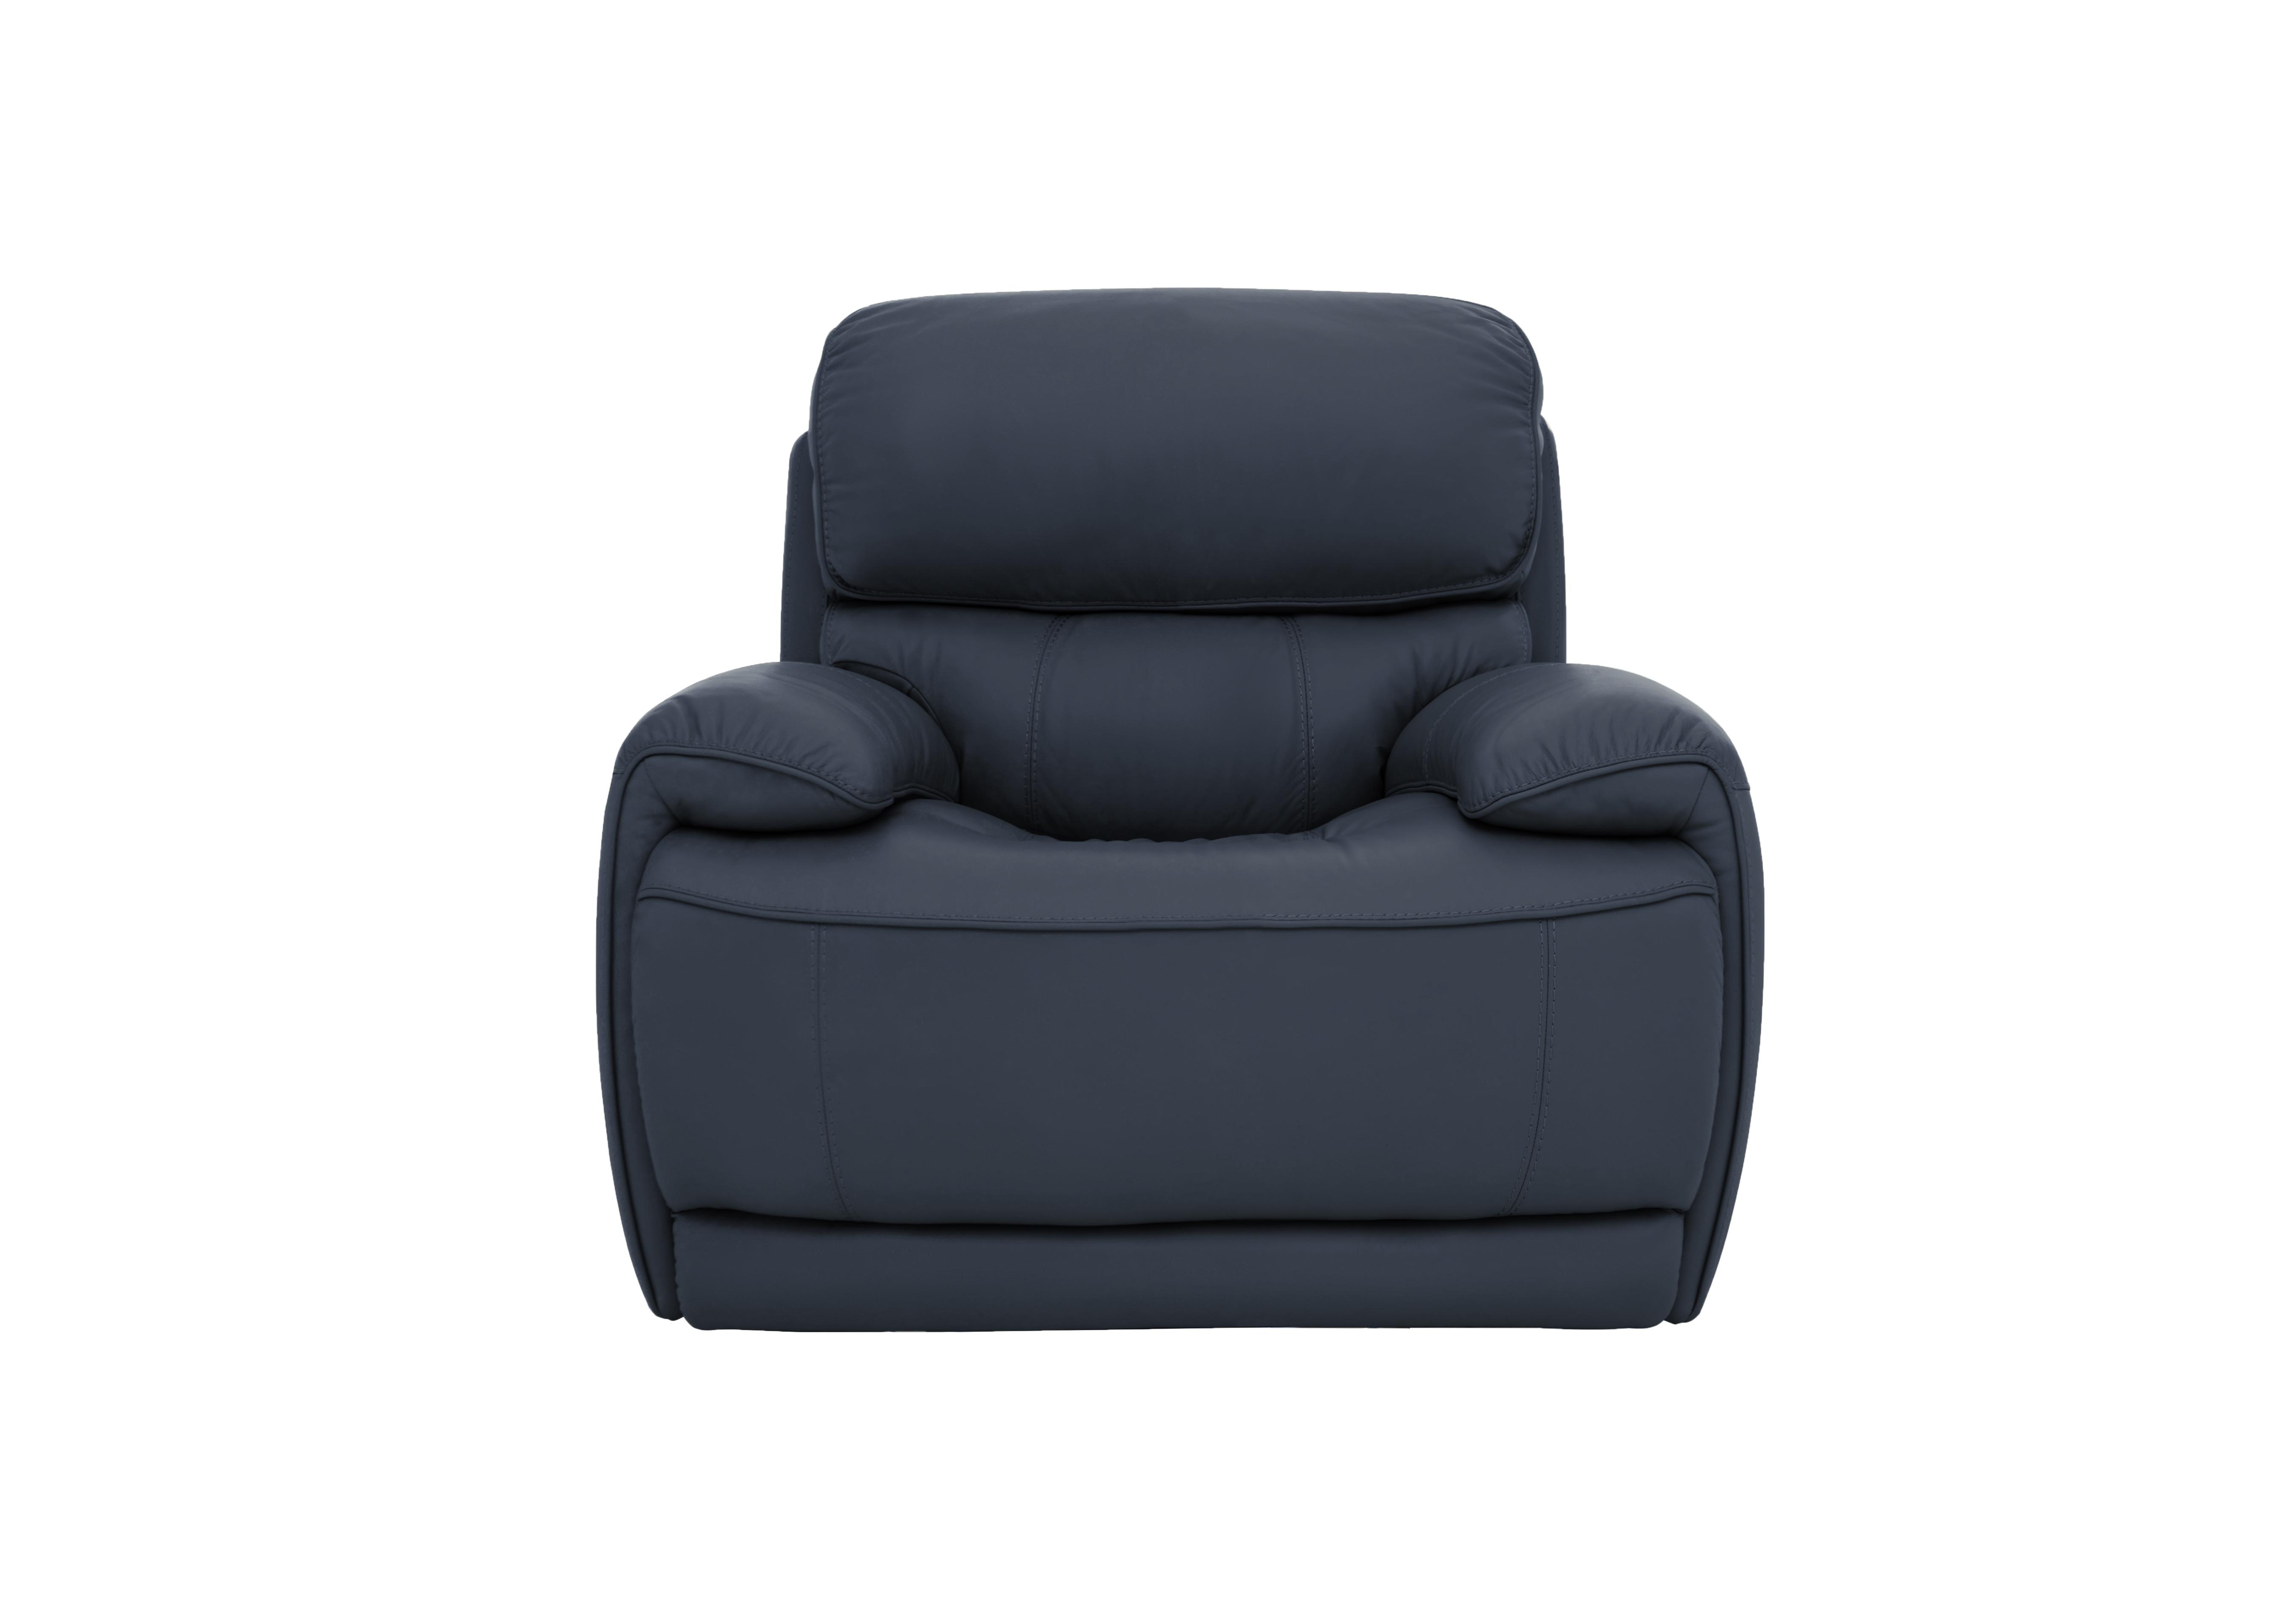 Rocco Leather Power Rocker Armchair with Power Headrests in Bv-313e Ocean Blue on Furniture Village